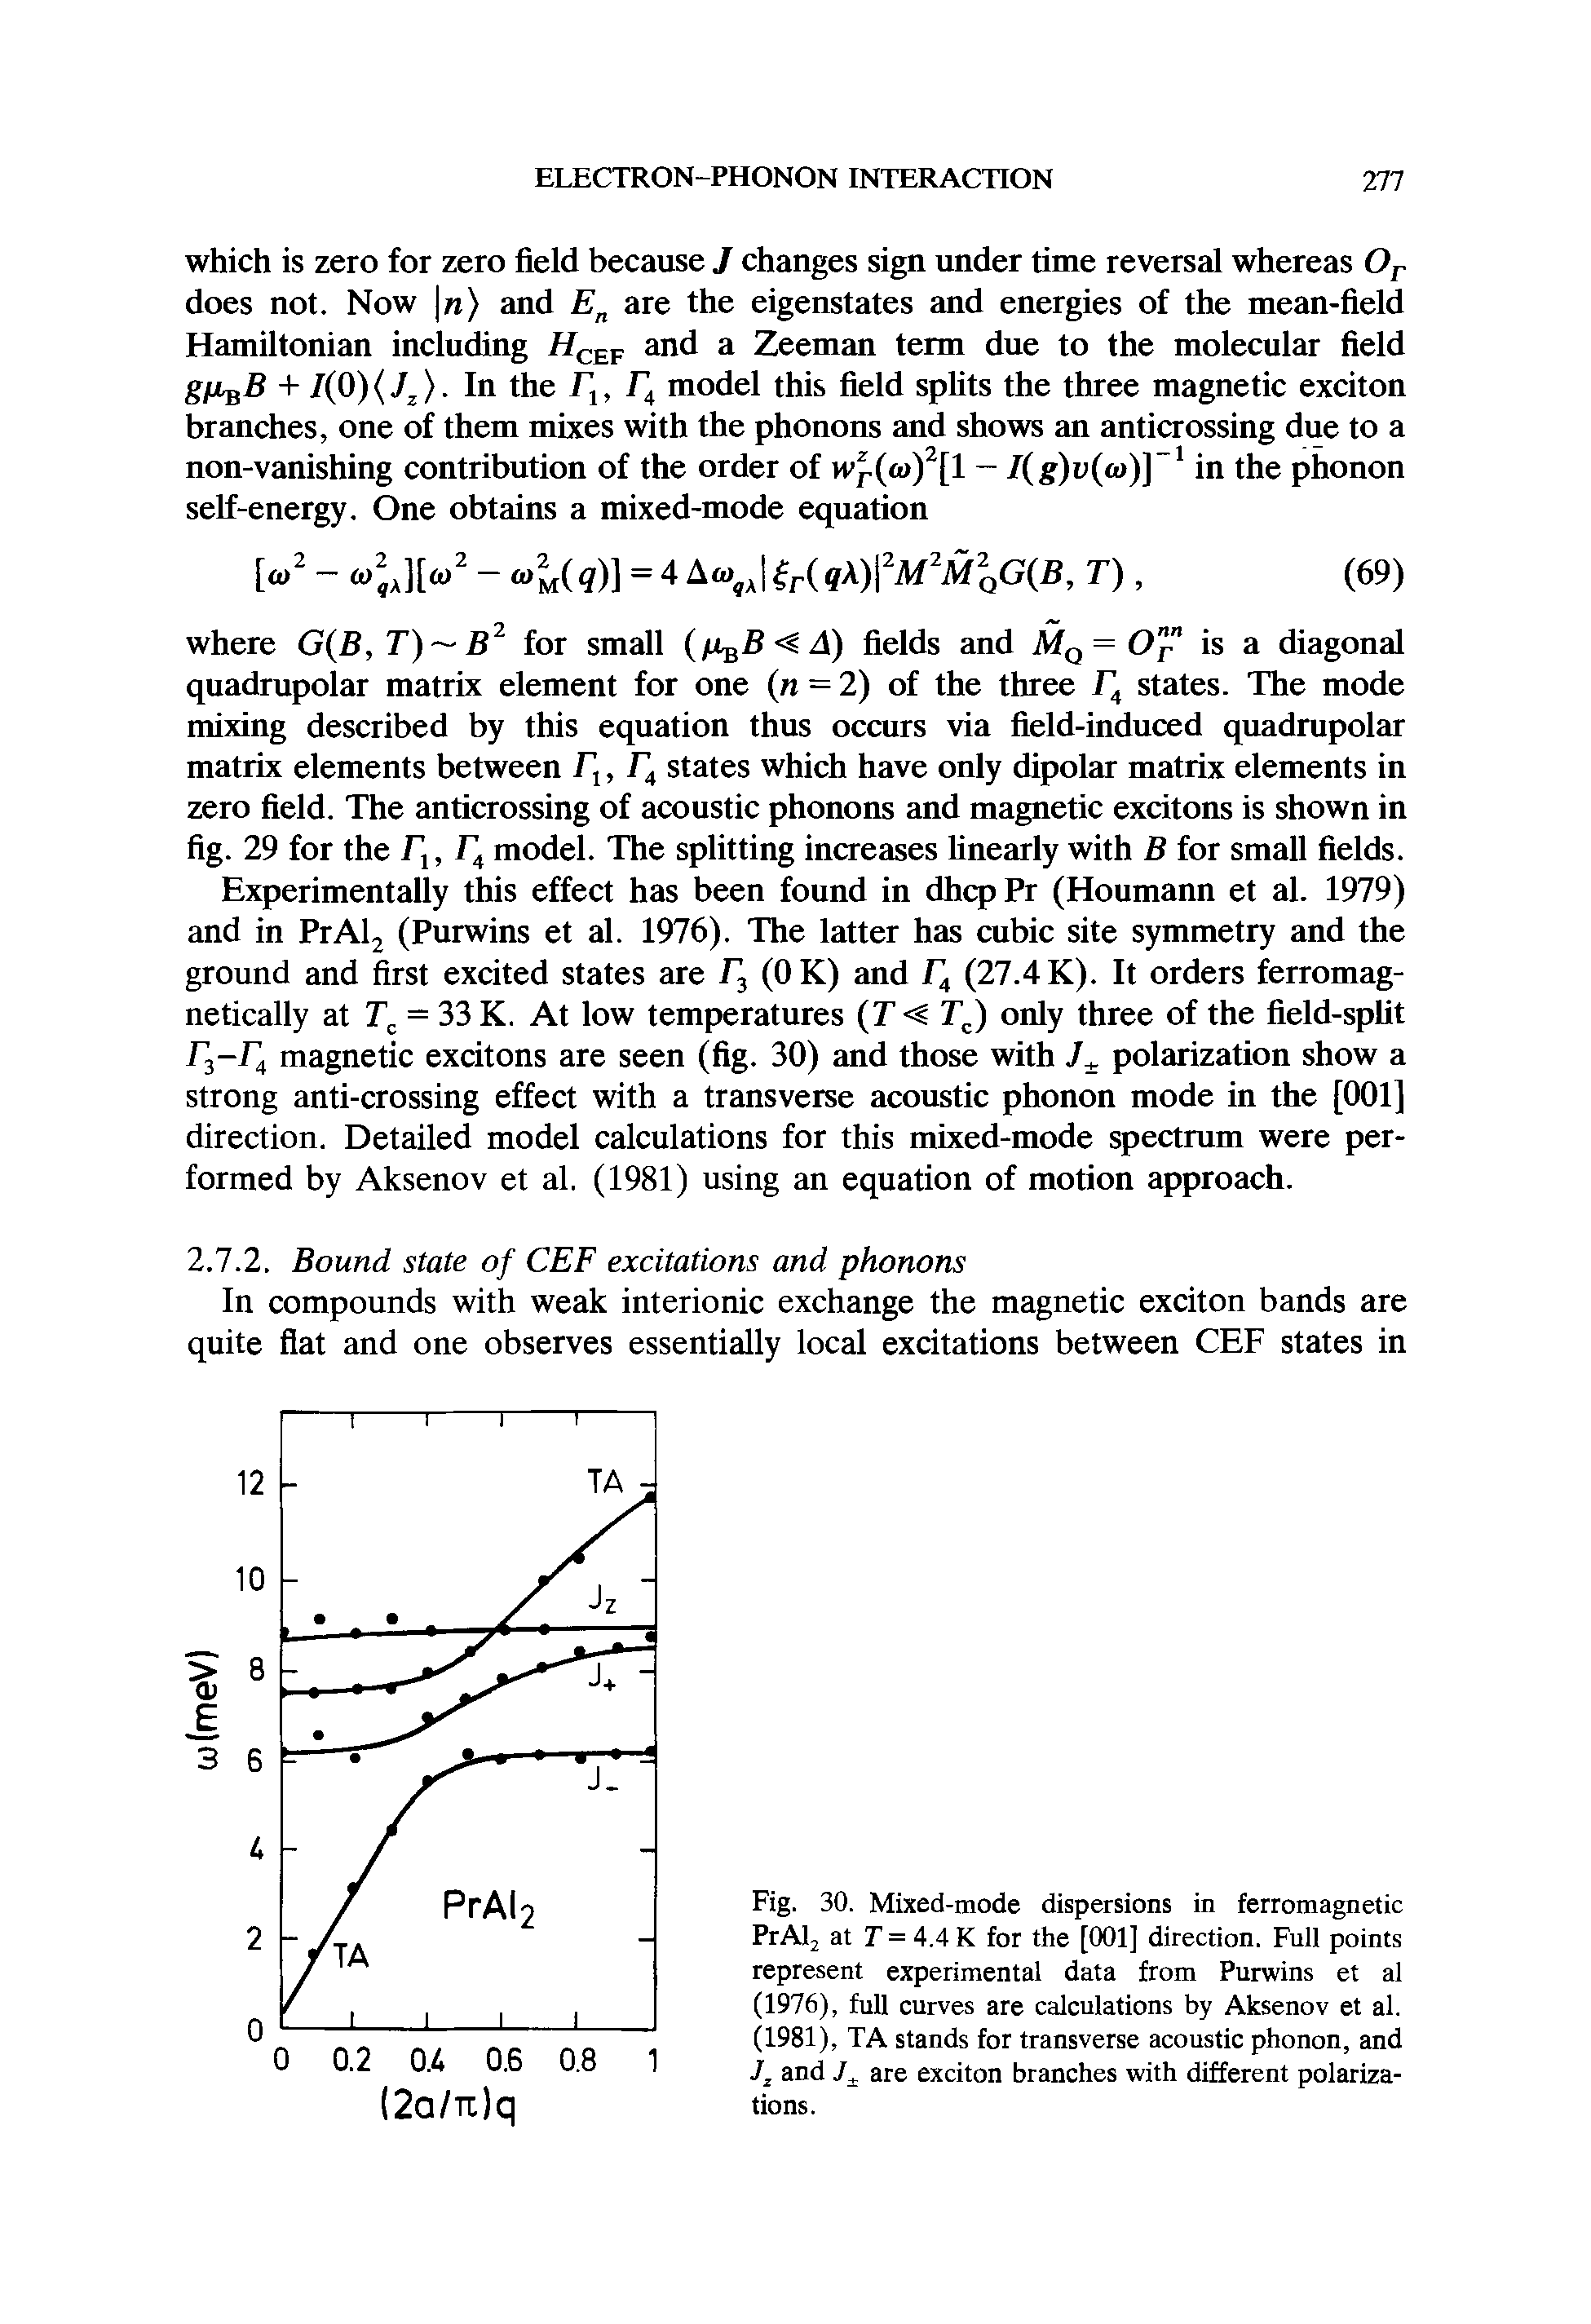 Fig. 30. Mixed-mode dispersions in ferromagnetic PrAlj at T = 4.4 K for the [001] direction. Full points represent experimental data from Purwins et al (1976), full curves are calculations by Aksenov et al. (1981), TA stands for transverse acoustic phonon, and and are exdton branches with different polarizations.